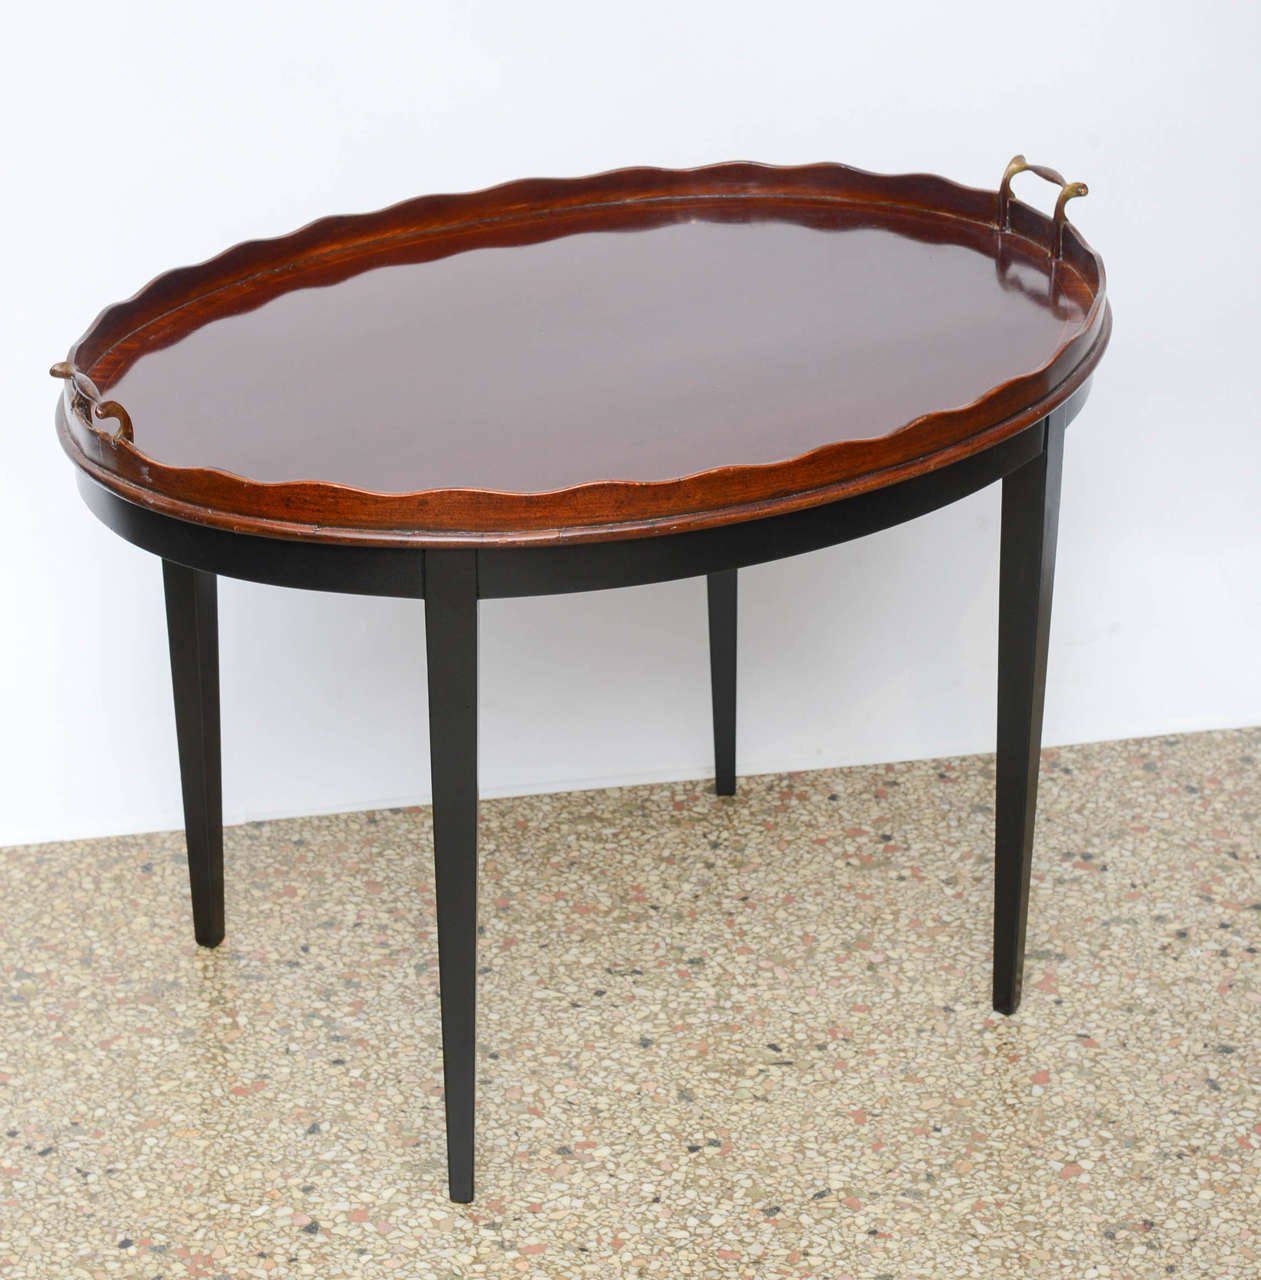 Beautifully executed with scalloped edge and brass handles. The tray is mahogany with cross banding affixed to a satin black stand with tapered legs.  Restored finish.